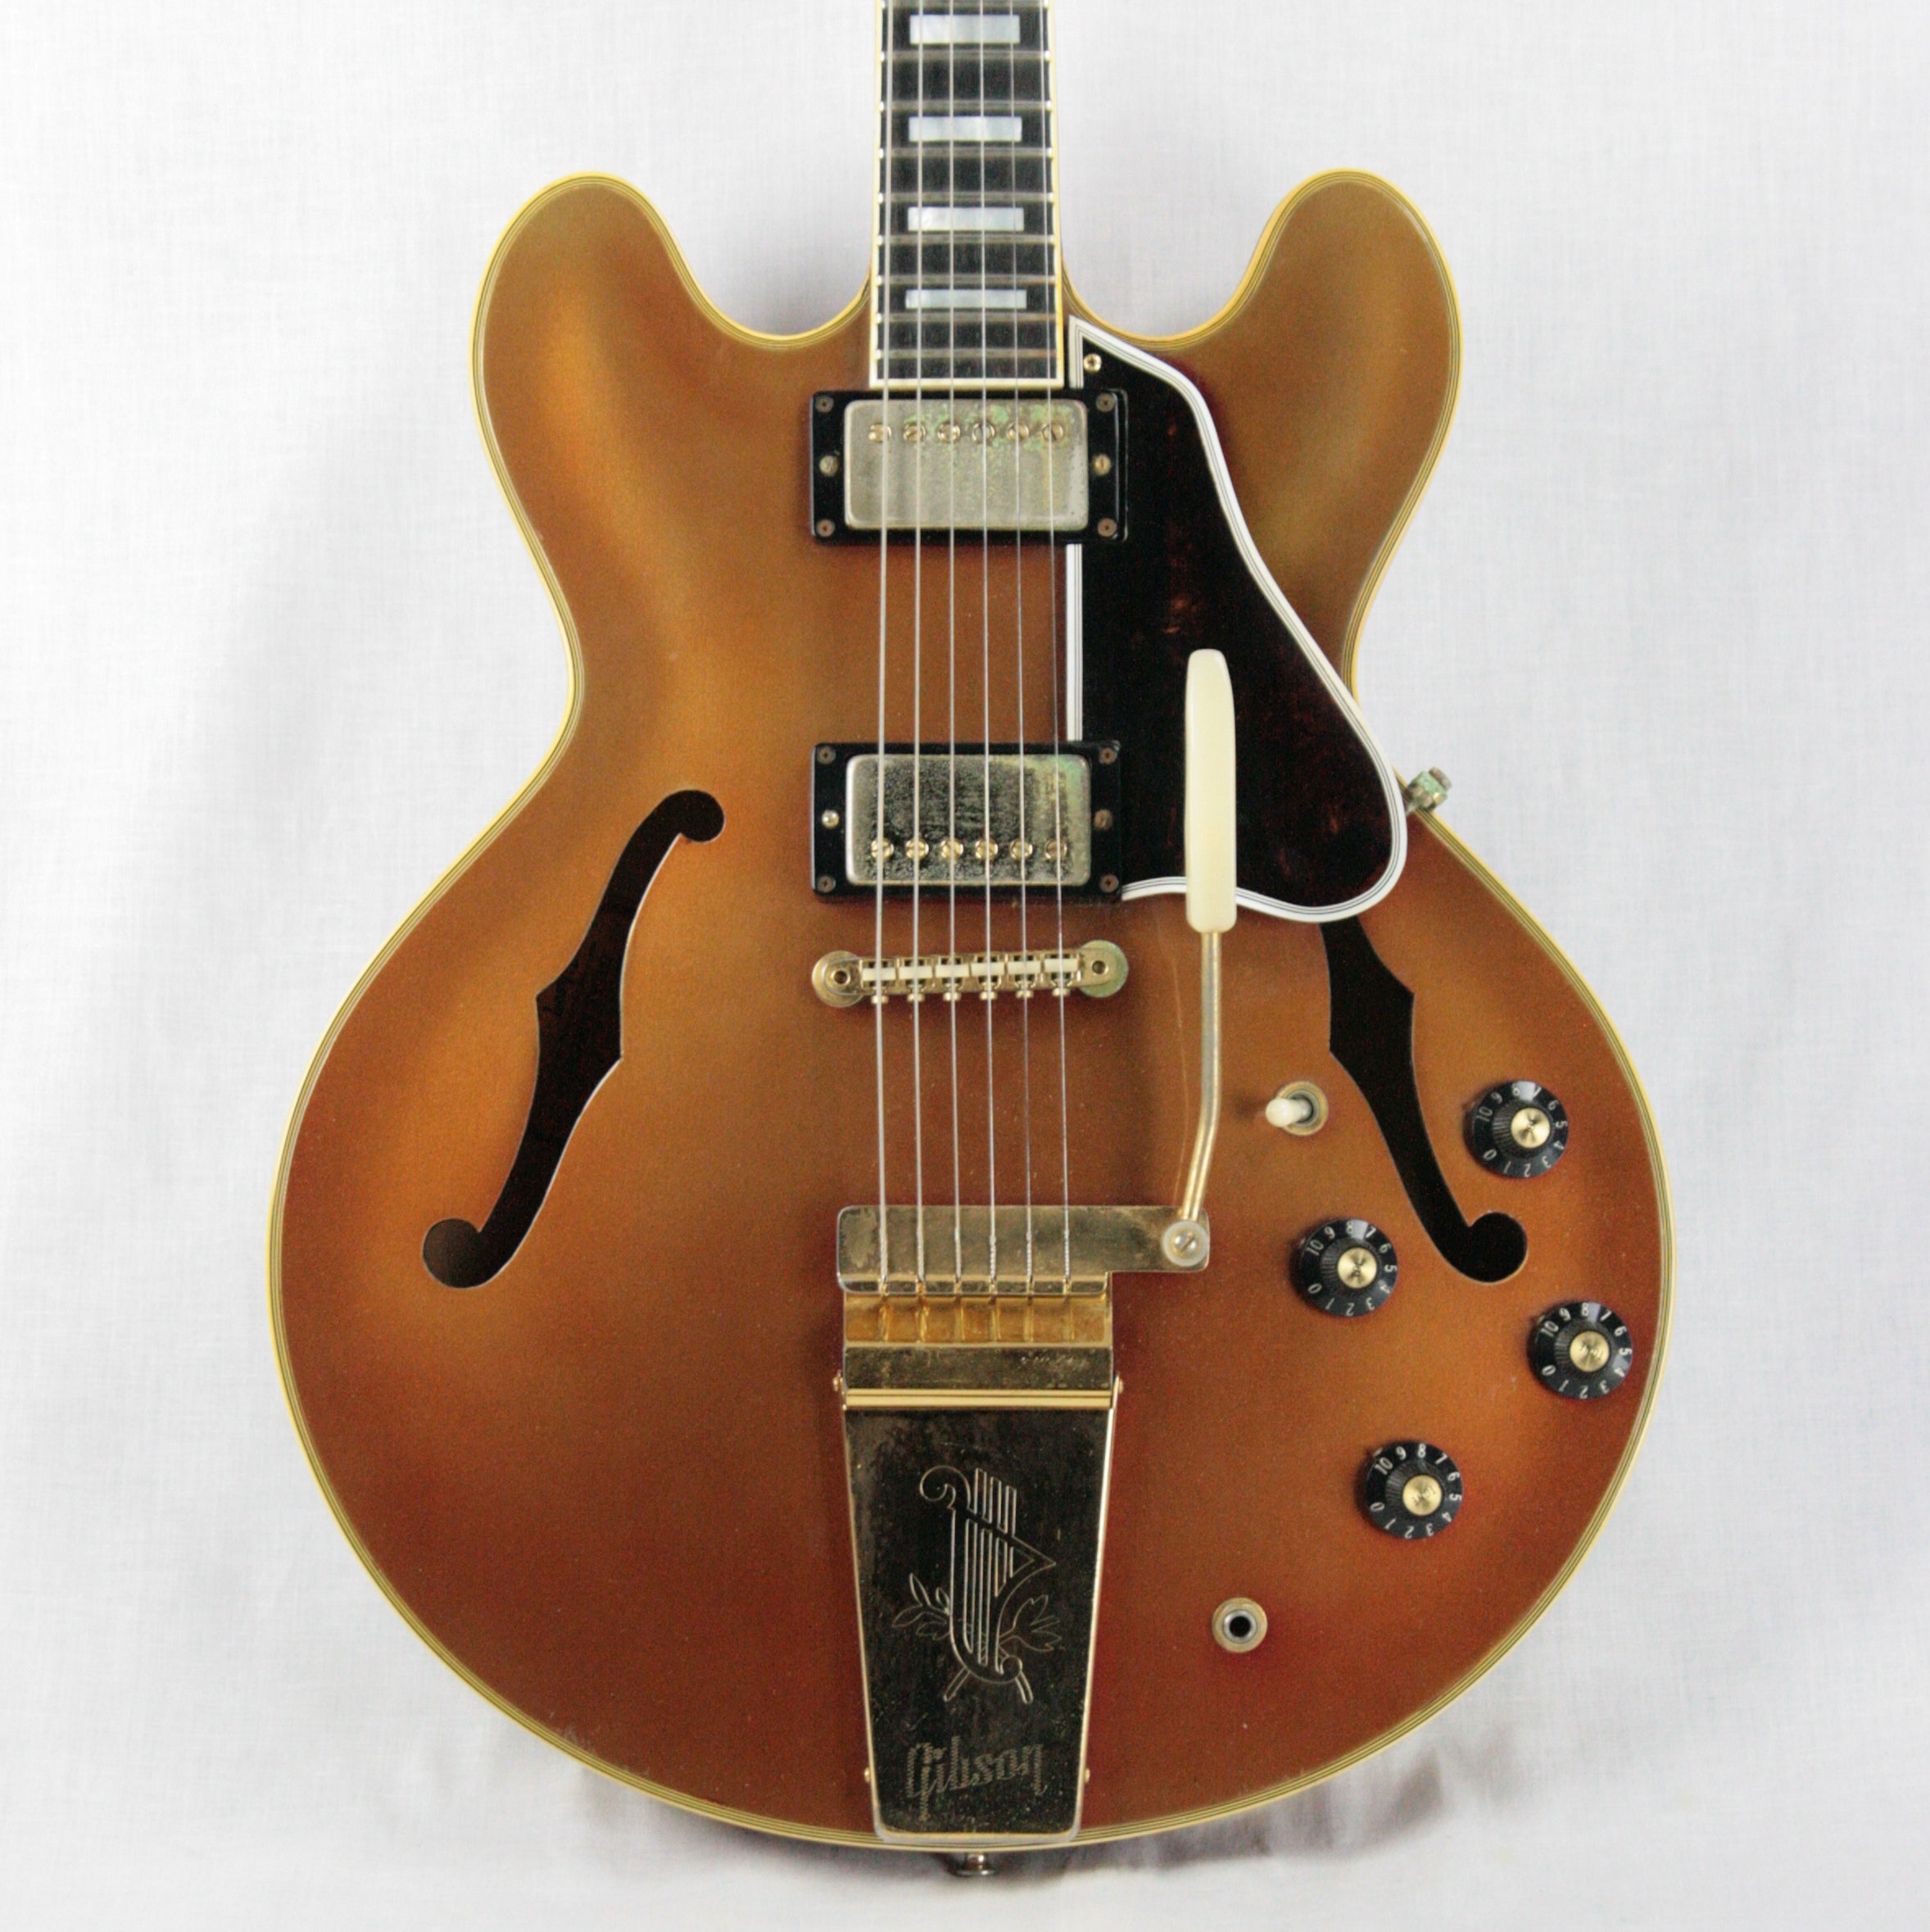 1968 Gibson ES-355 in faded Sparkling Burgundy finish